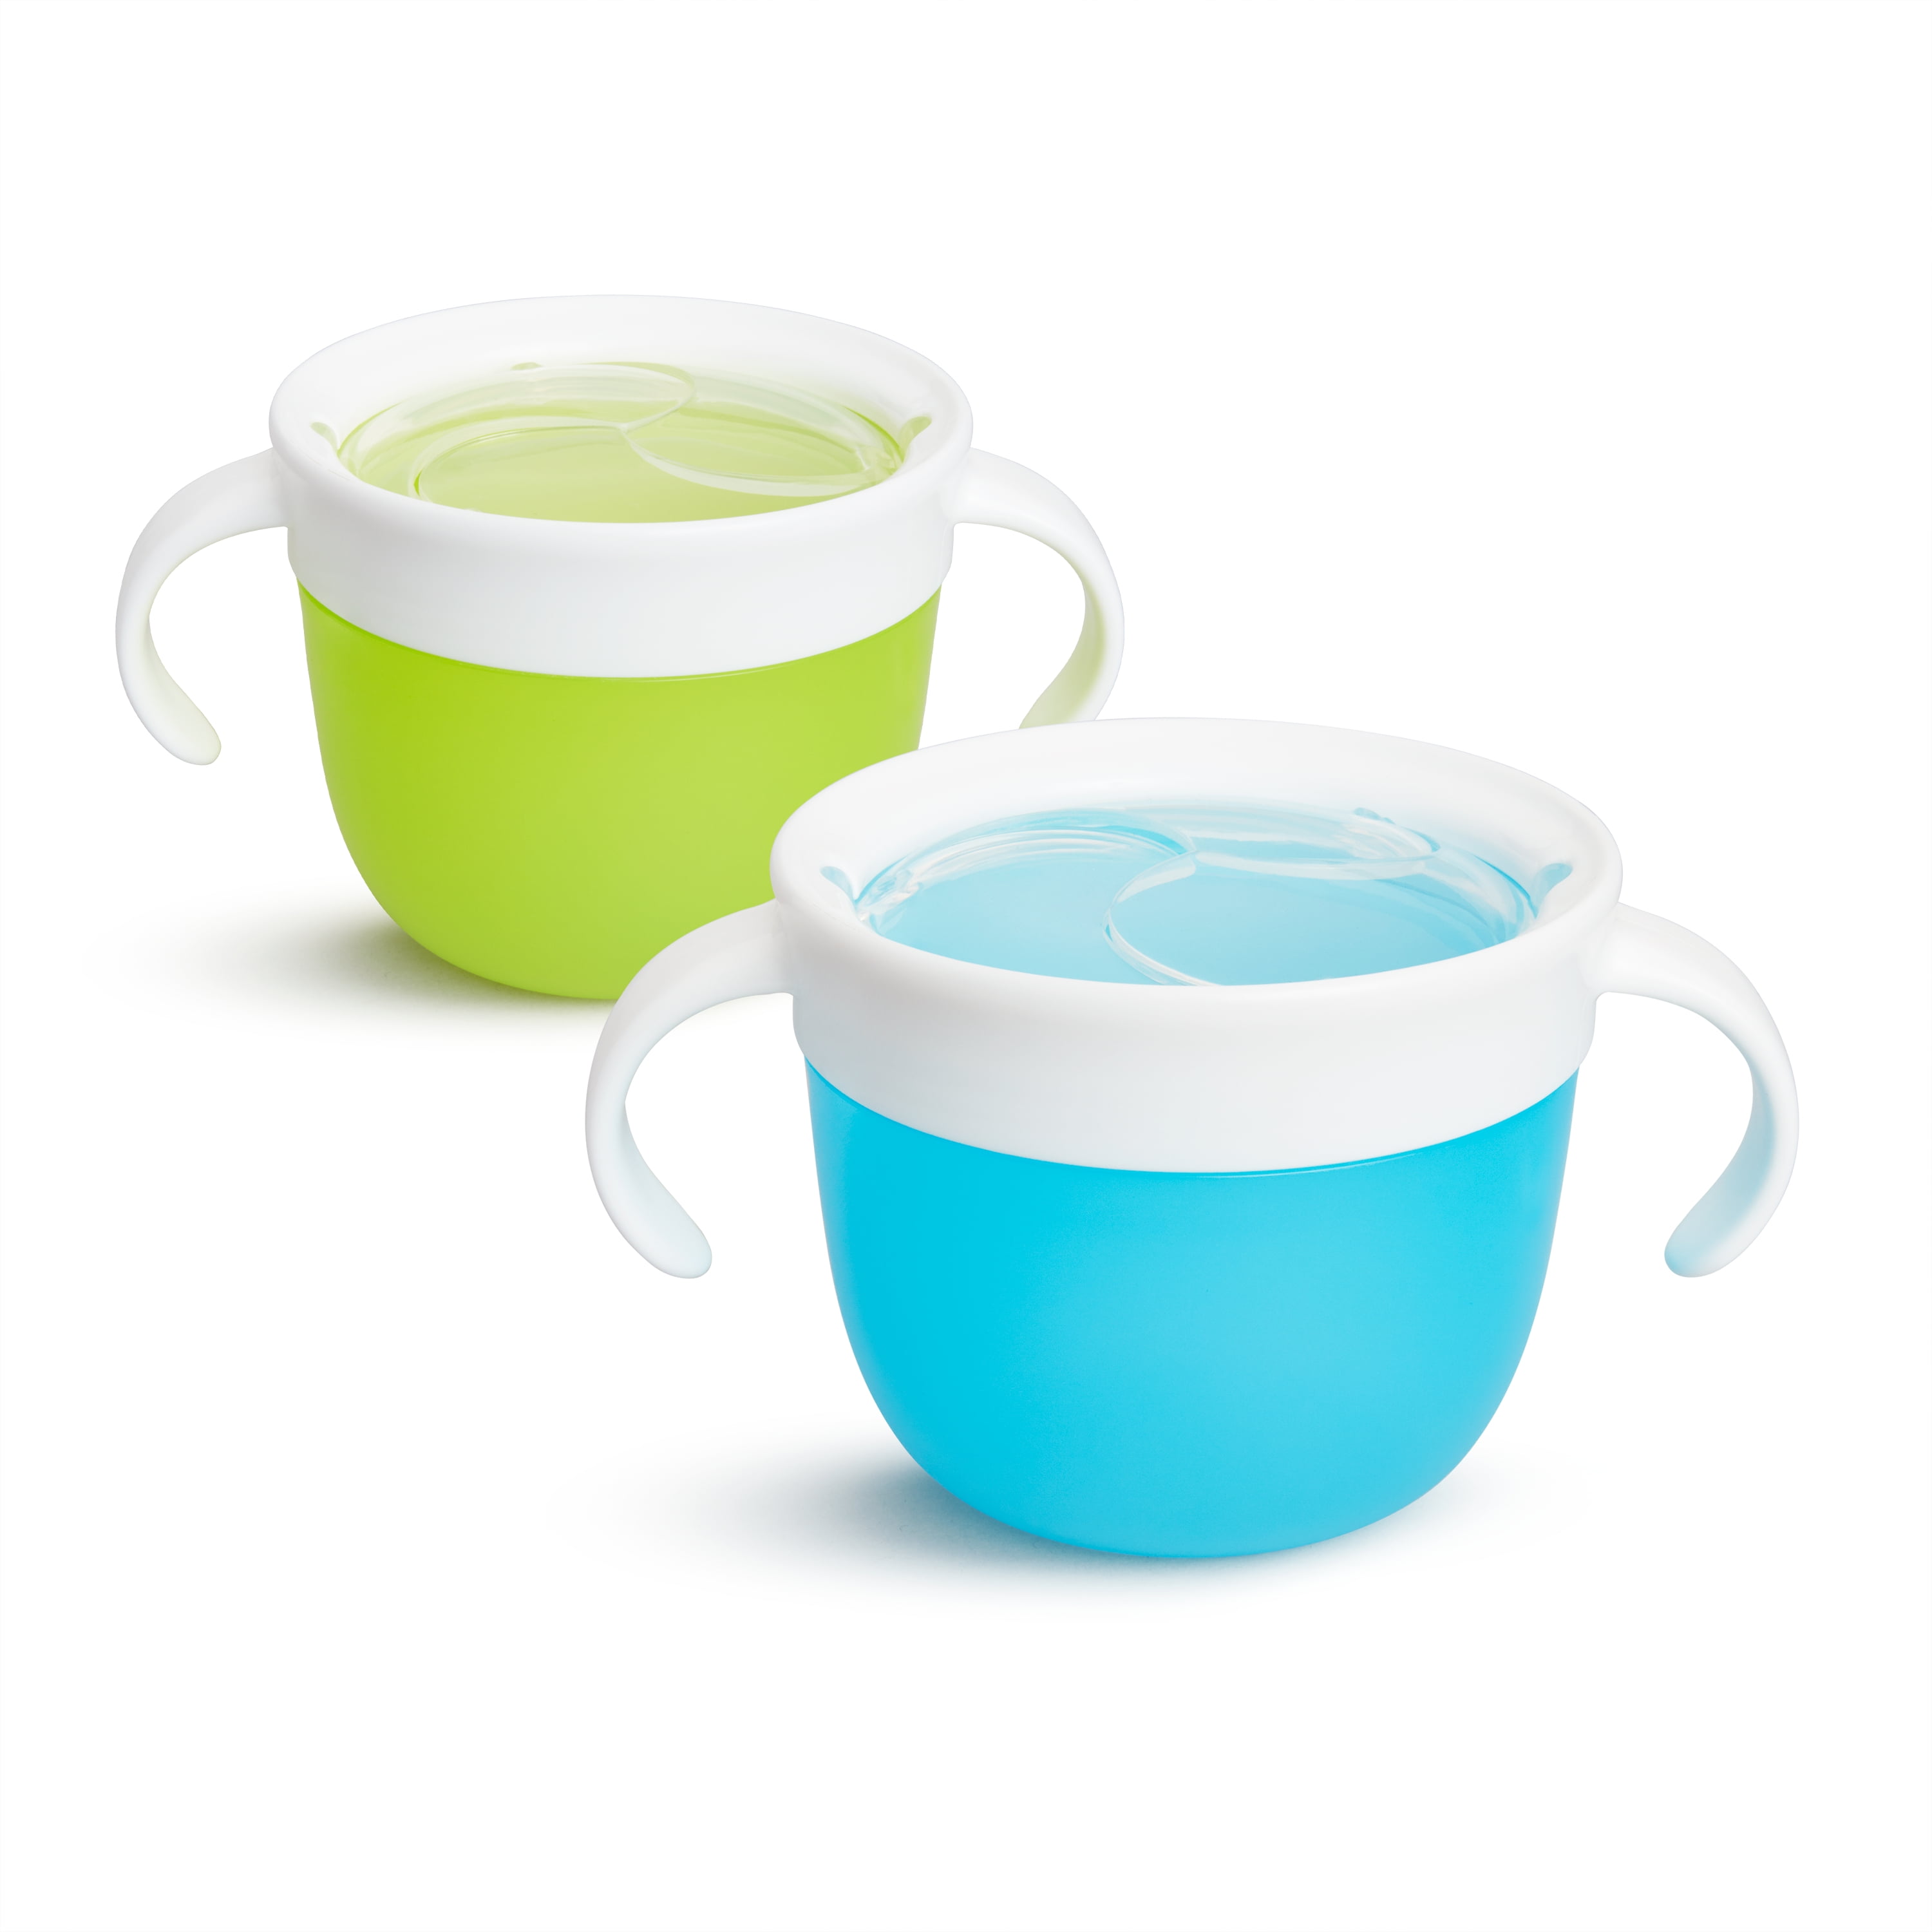 Munchkin SnackCatch & Sip 2-in-1 Snack Catcher and 2 Piece Spill-Proof Cup Blue